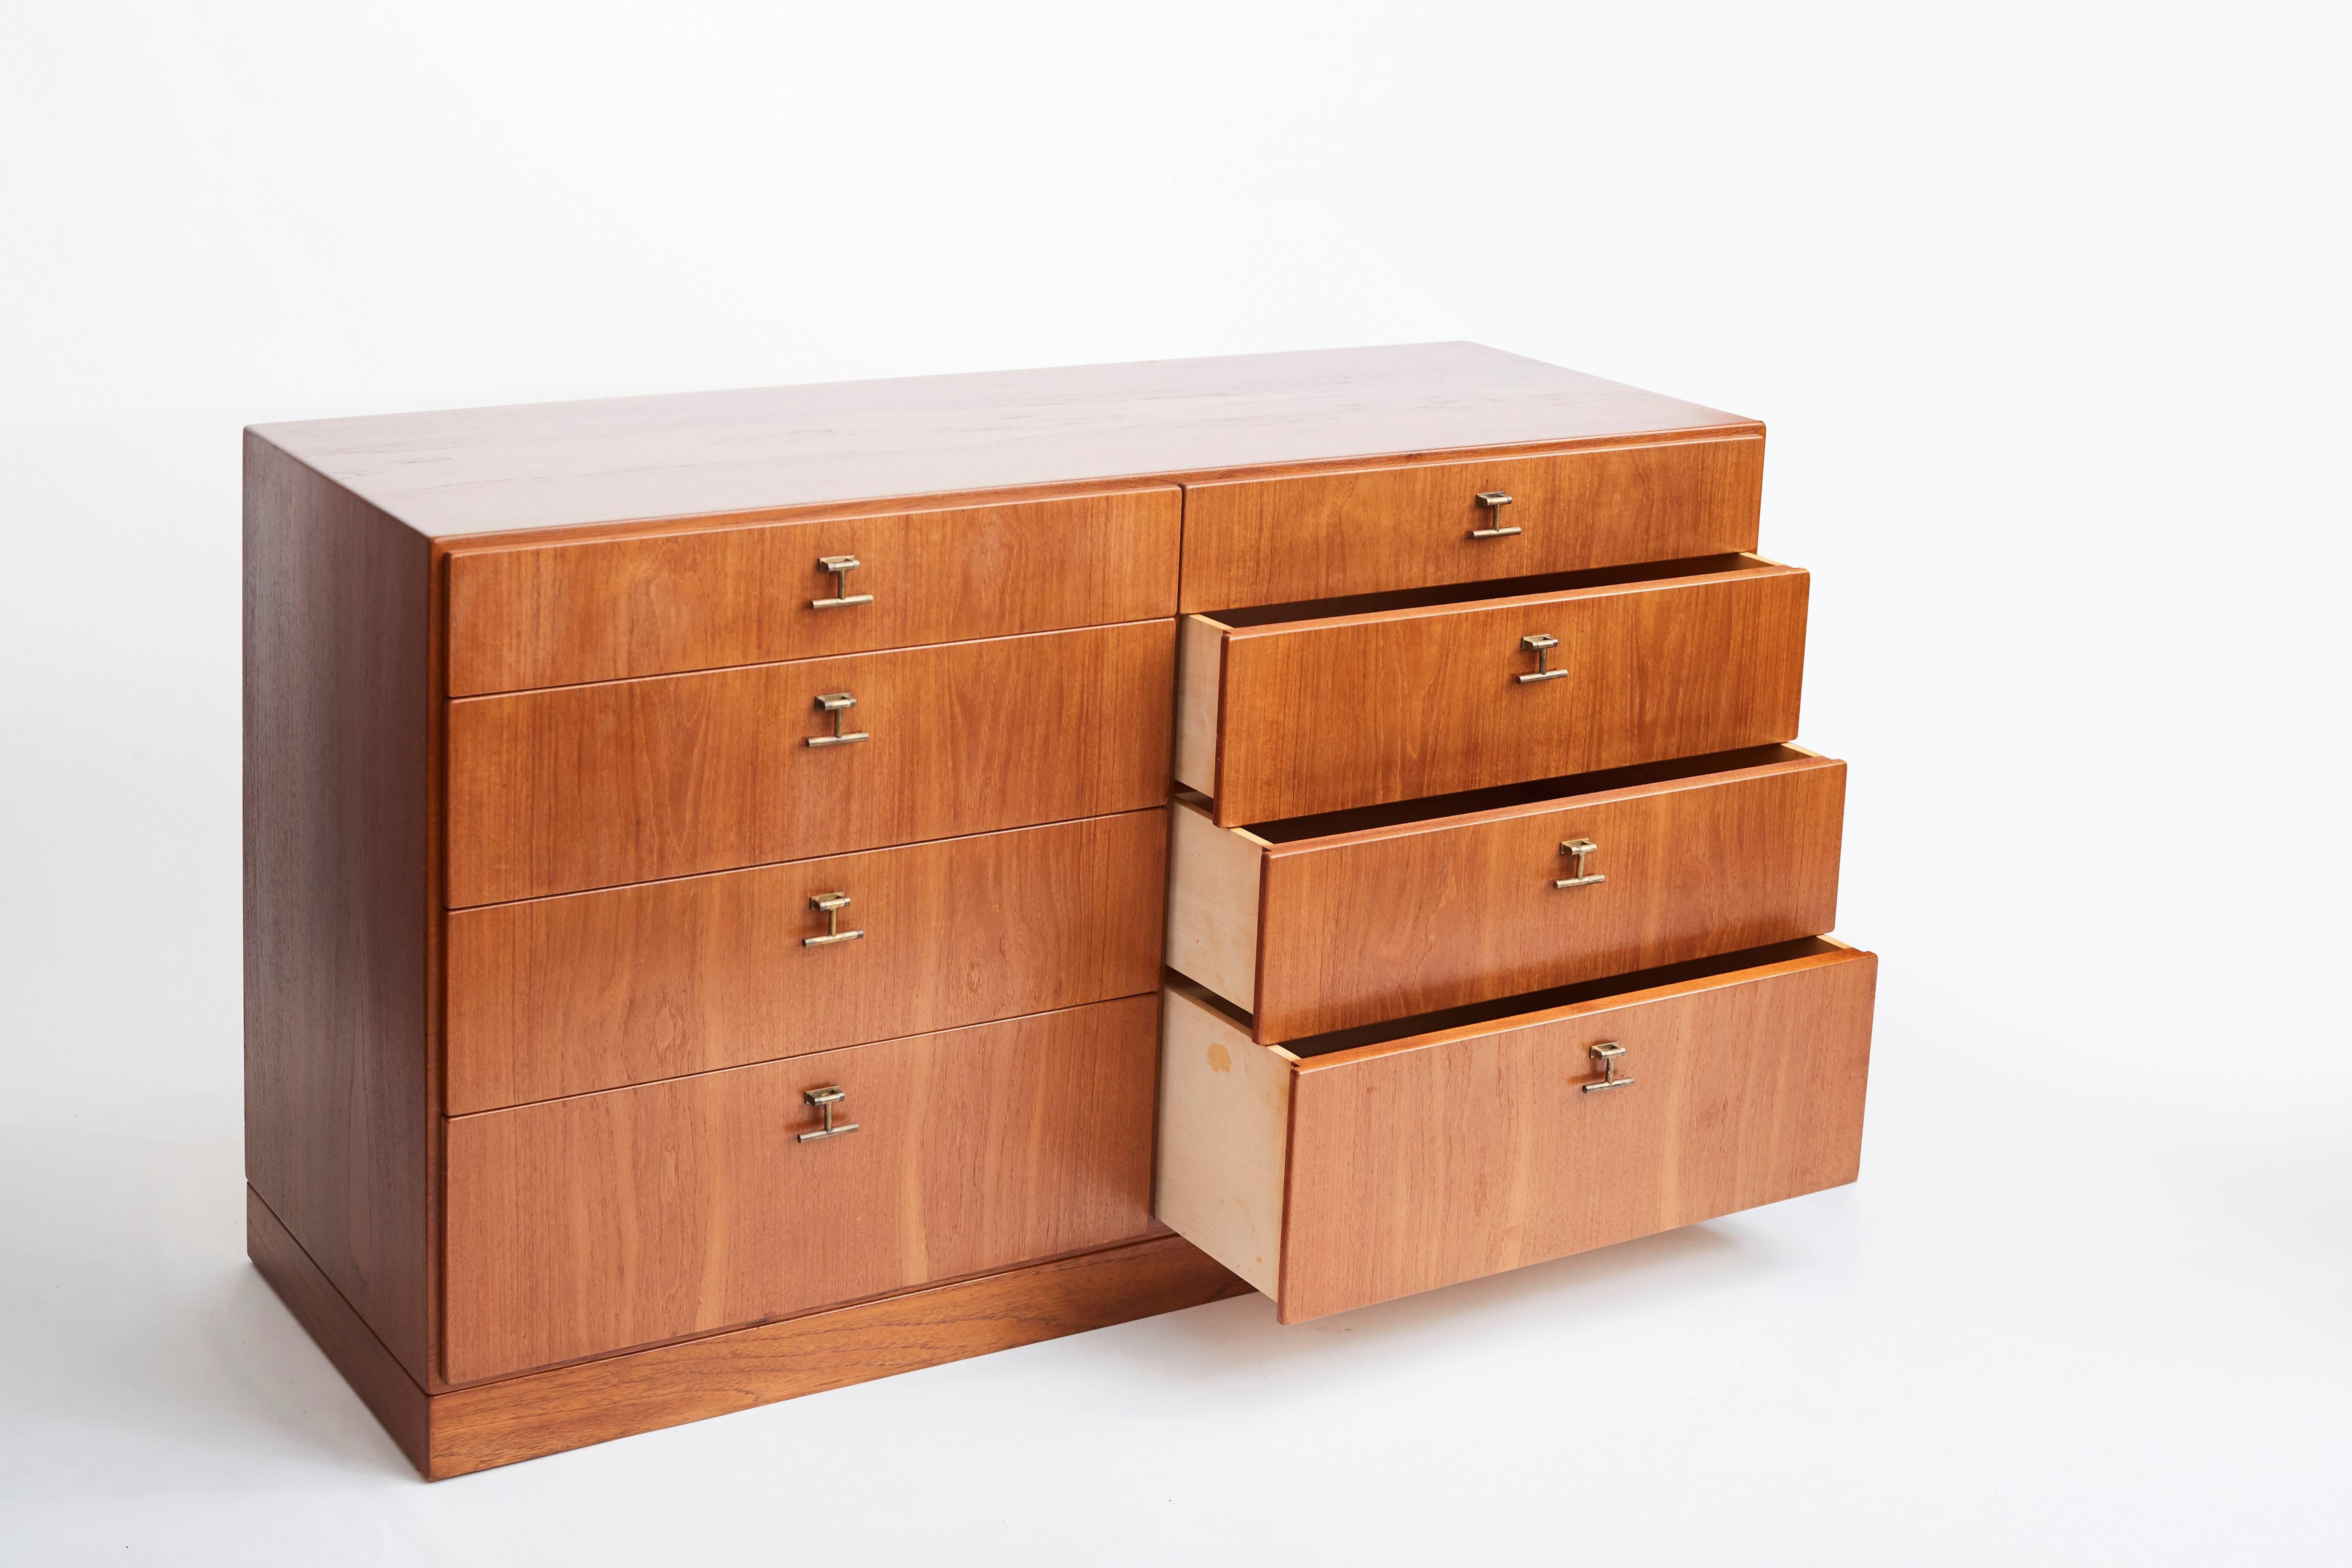 A chest of drawers in oak. Eight drawers decorated with brass handles.
Model 234, edited by FDB.
Danish work by designer Børge Mogensen, circa 1958.